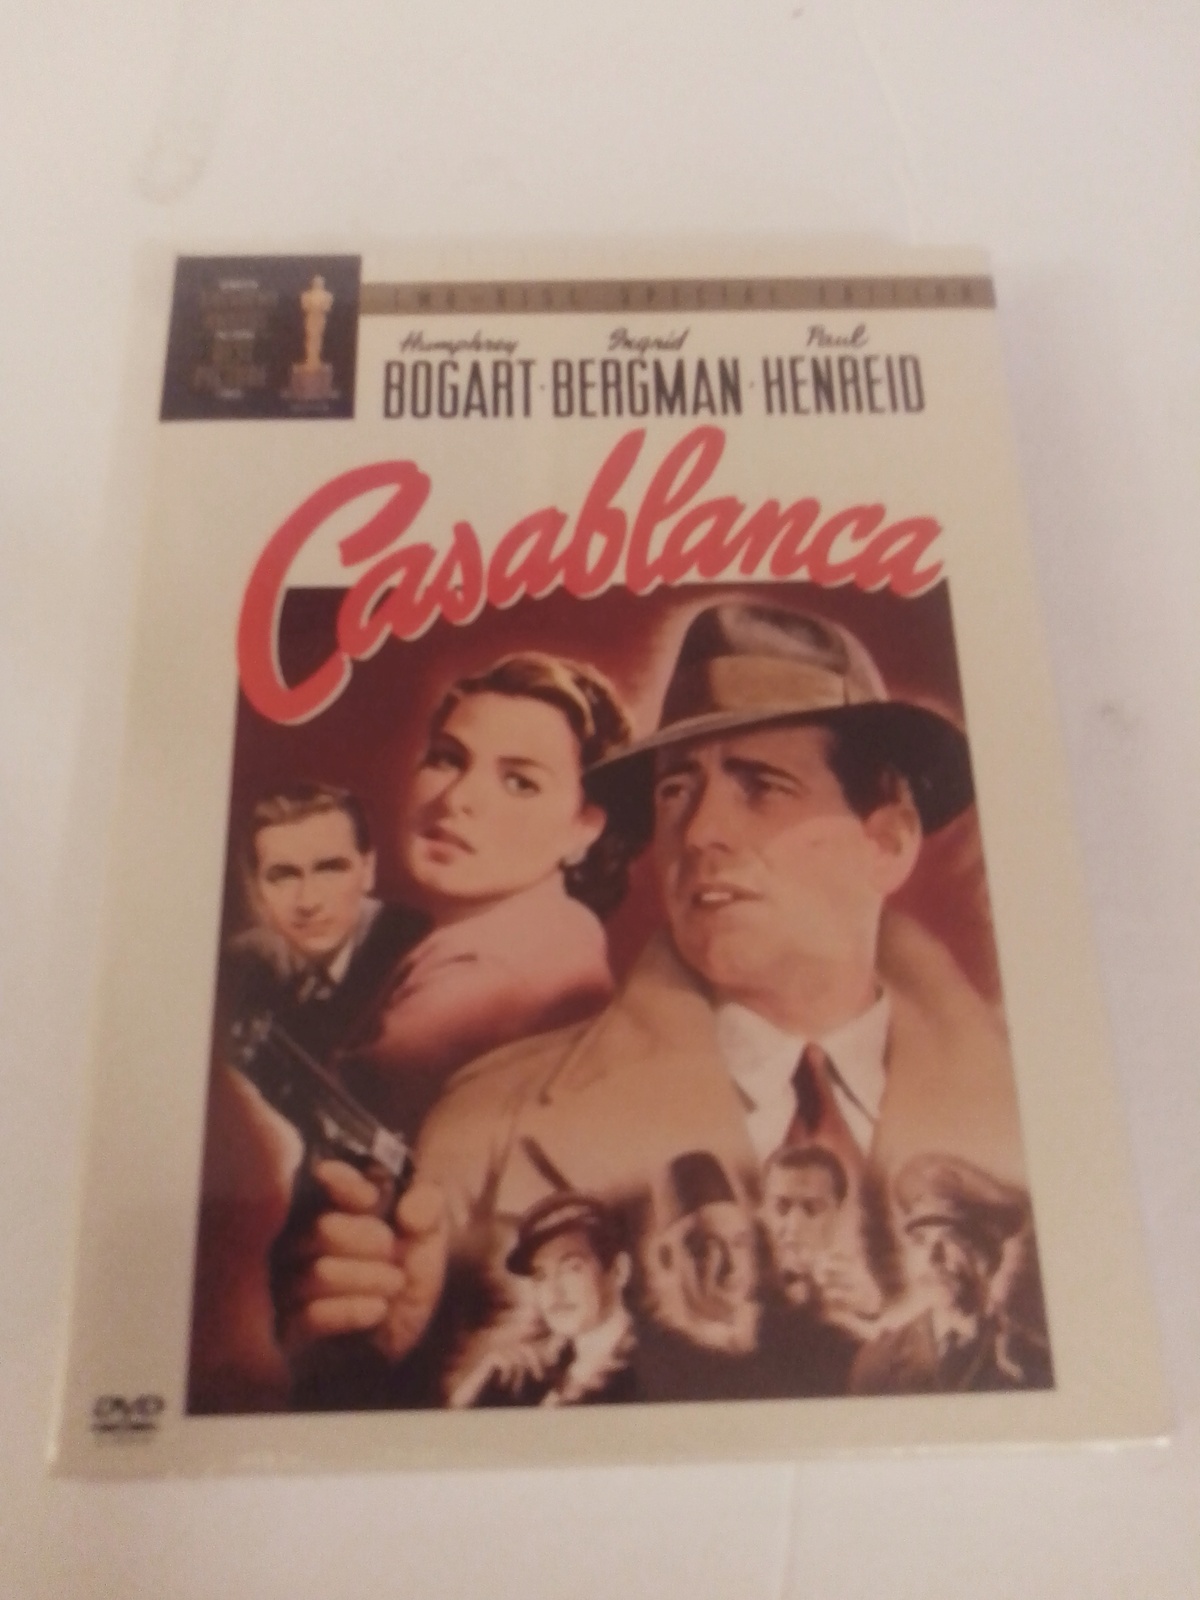 Casablanca 2003 Two-Disc Special Edition Region 1 Brand New Factory Sealed - $24.99